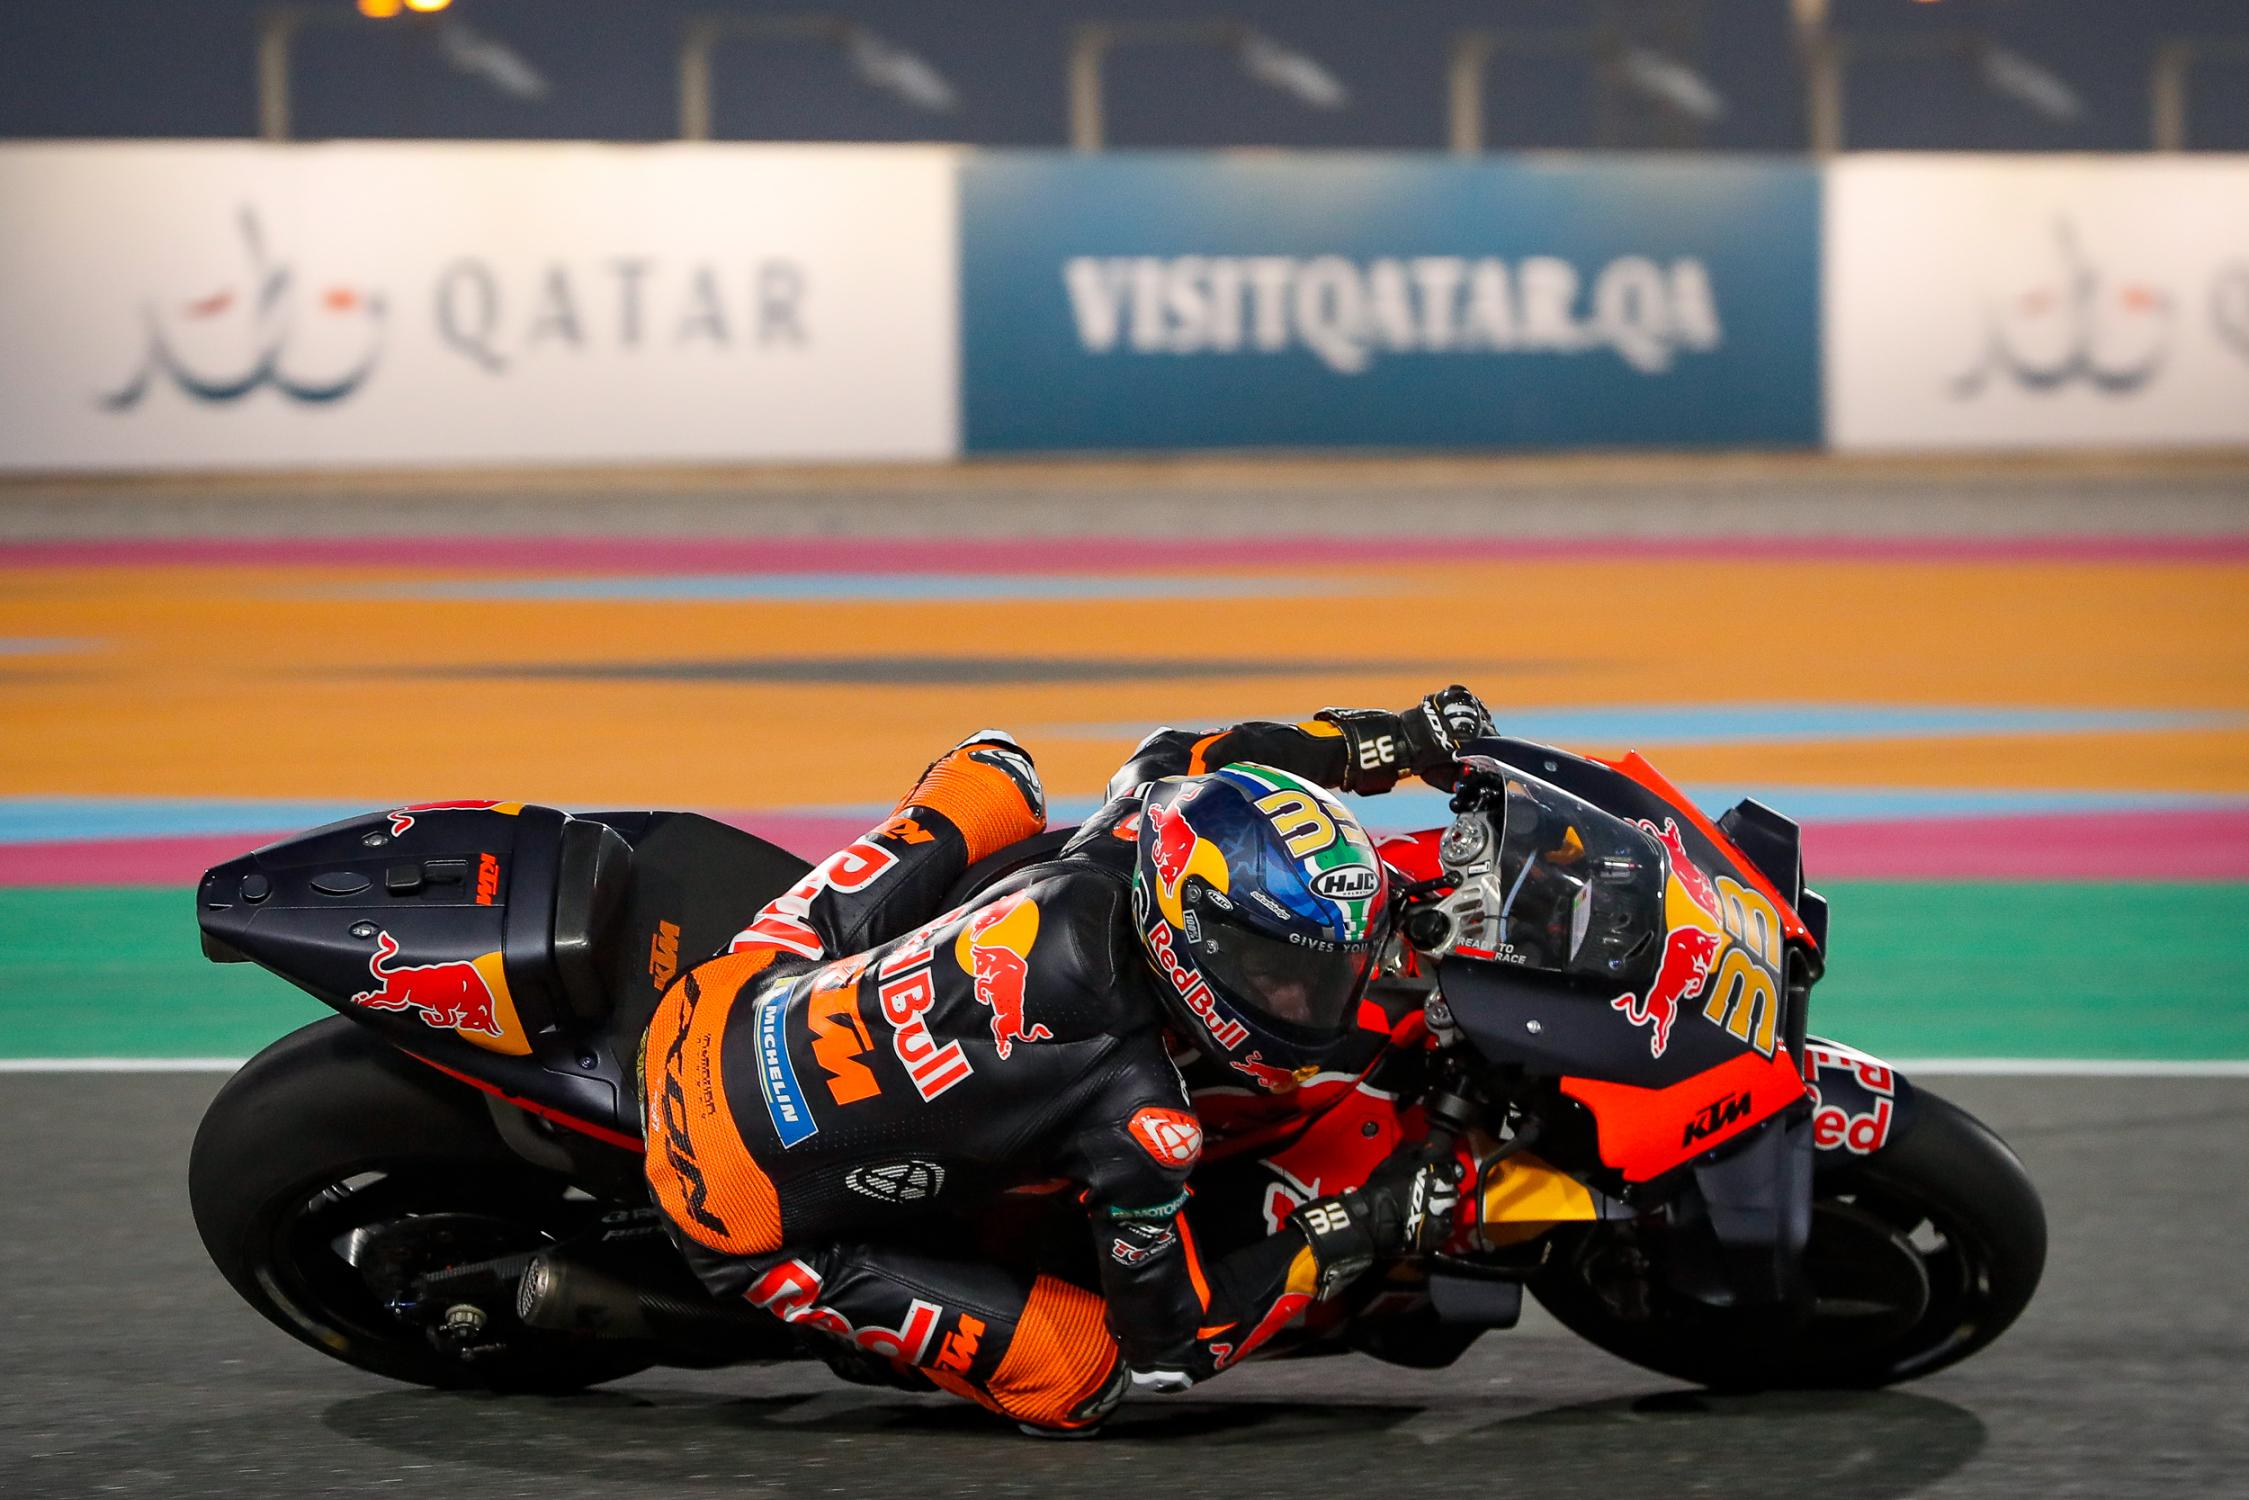 You are currently viewing Binder second as Bastianini claims emotional win at Qatar MotoGP